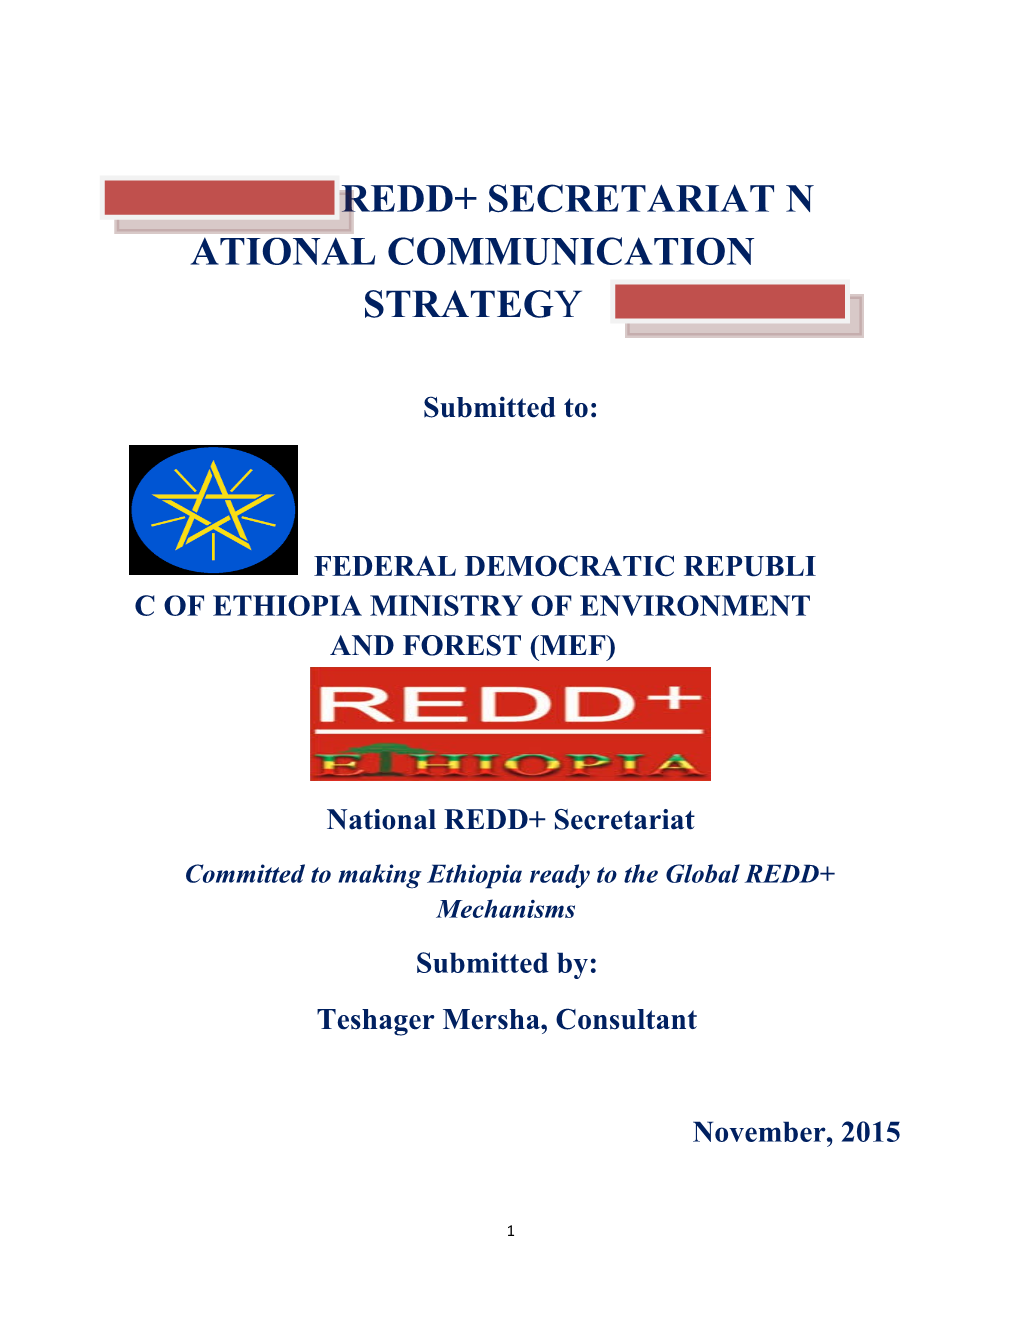 Committed to Making Ethiopia Ready to the Global REDD+ Mechanisms